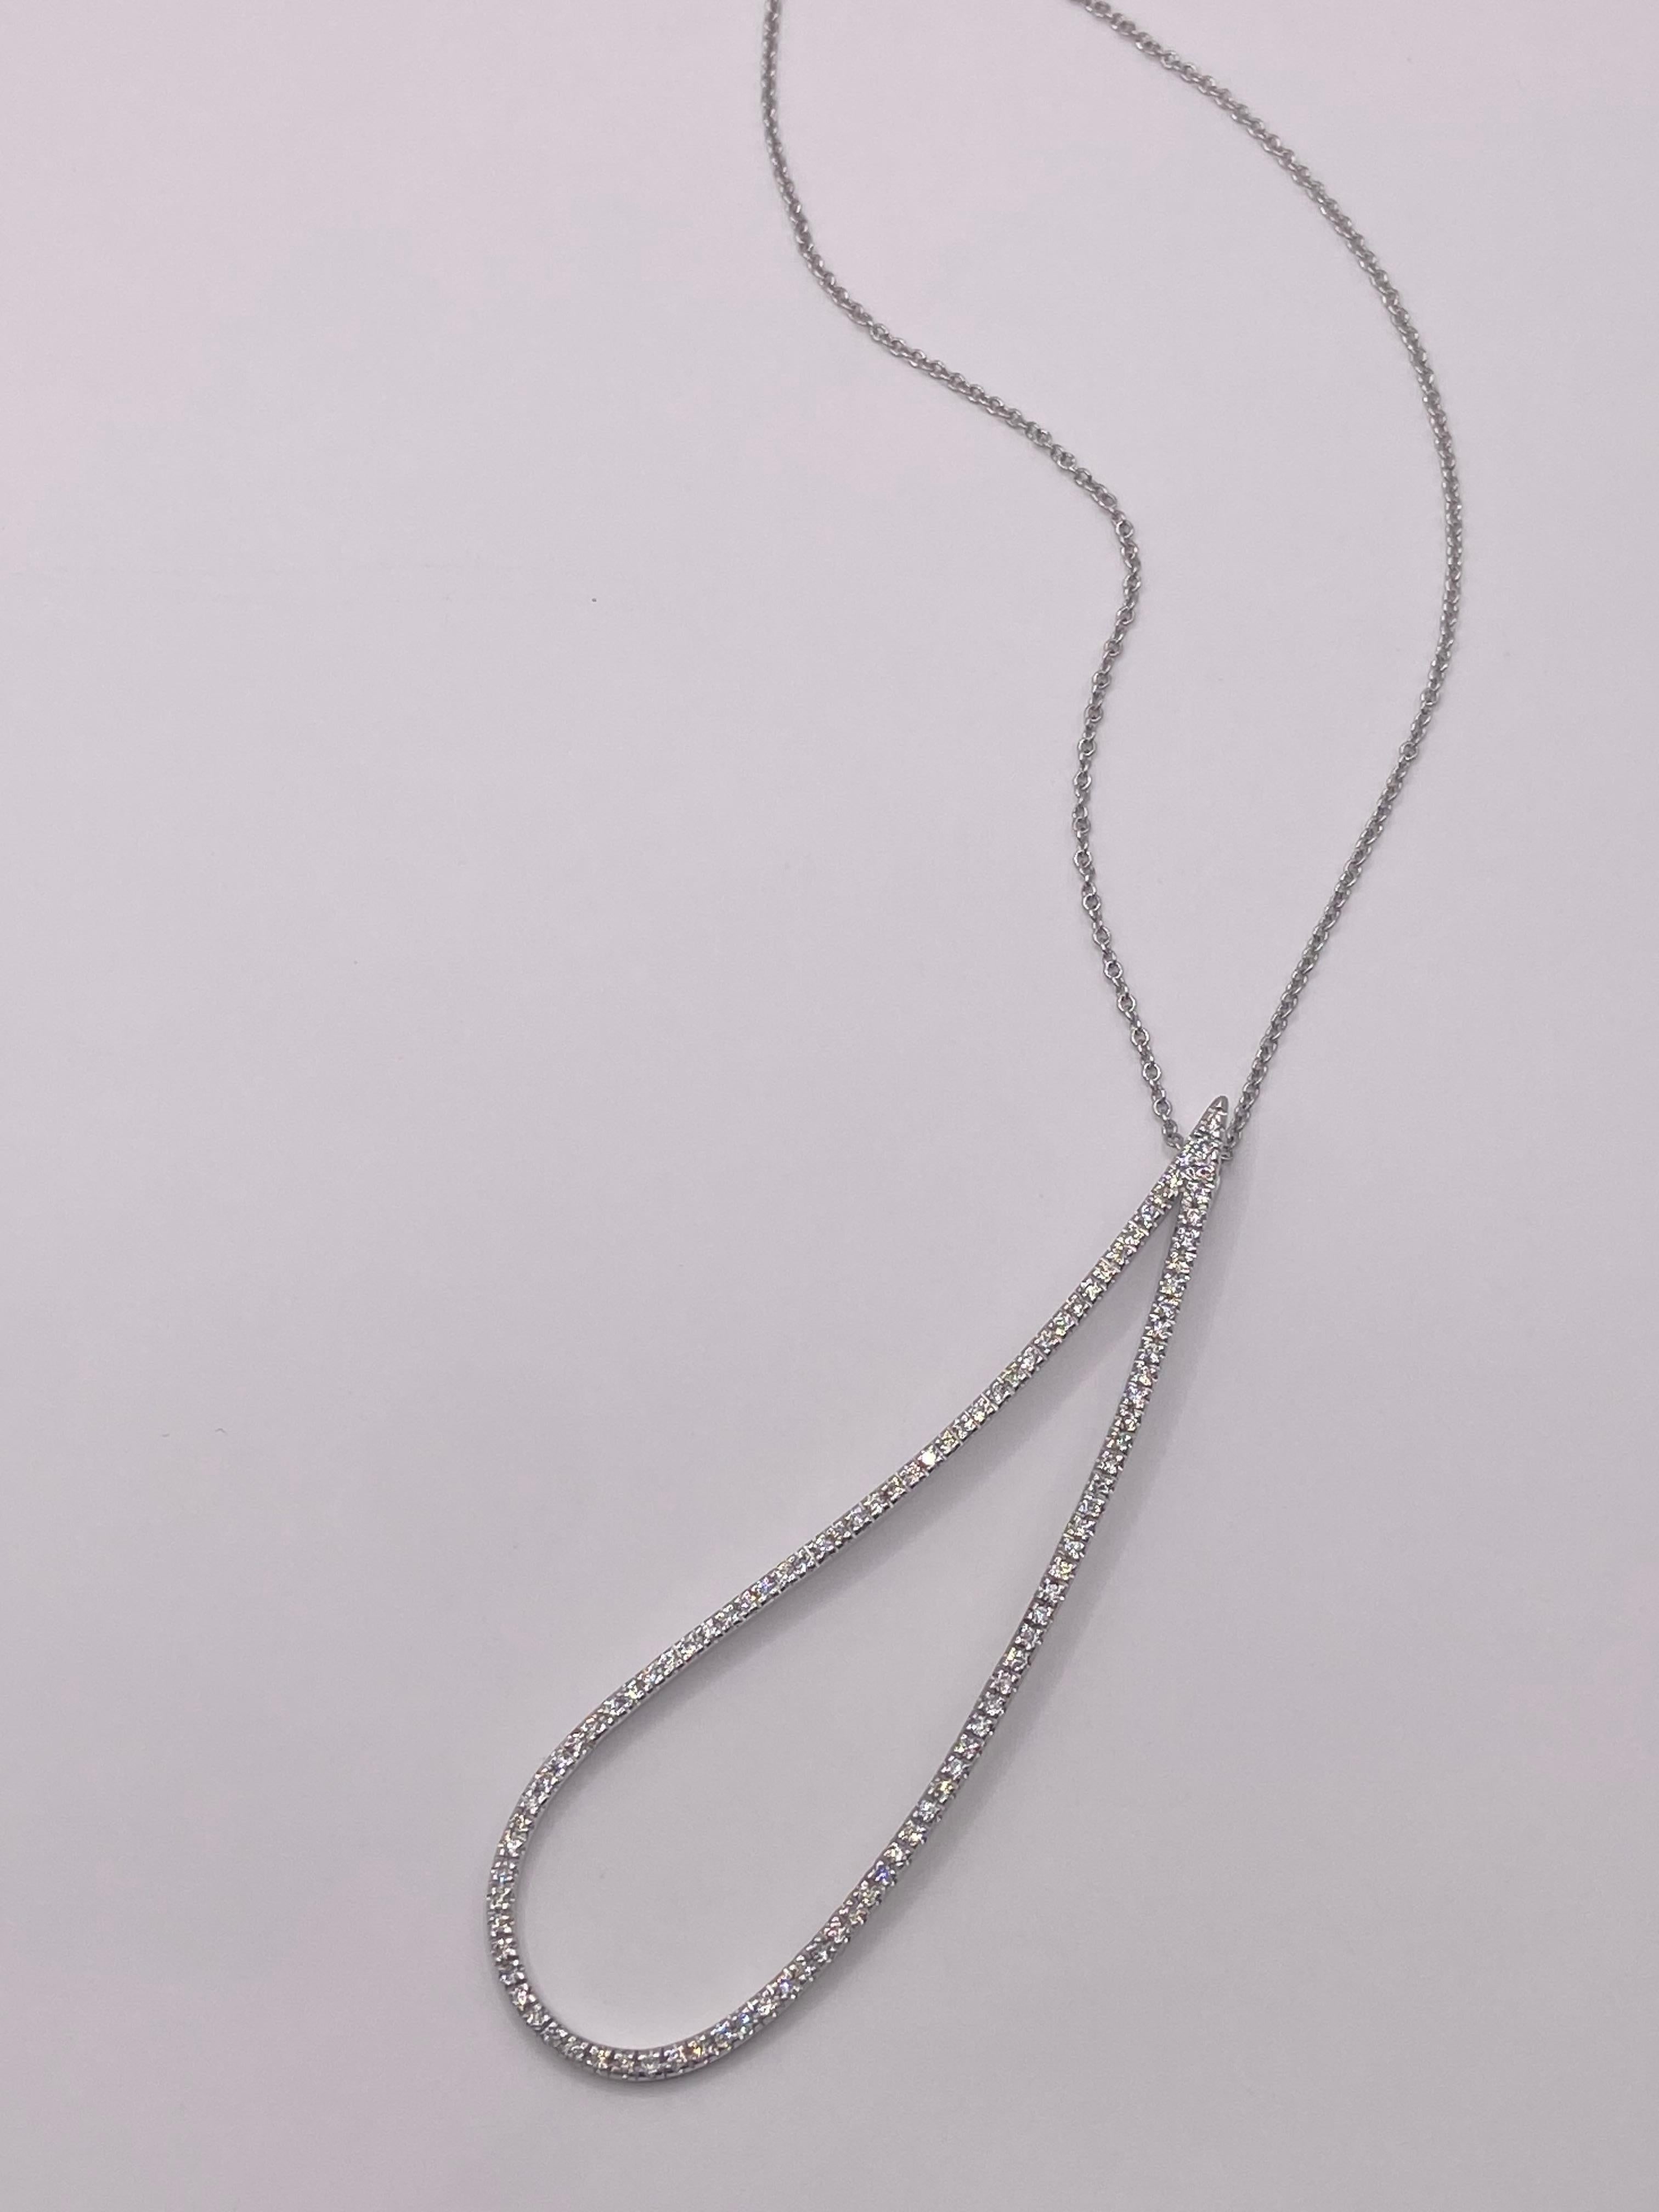 Metal: 18KT White gold
Chain Length: 18